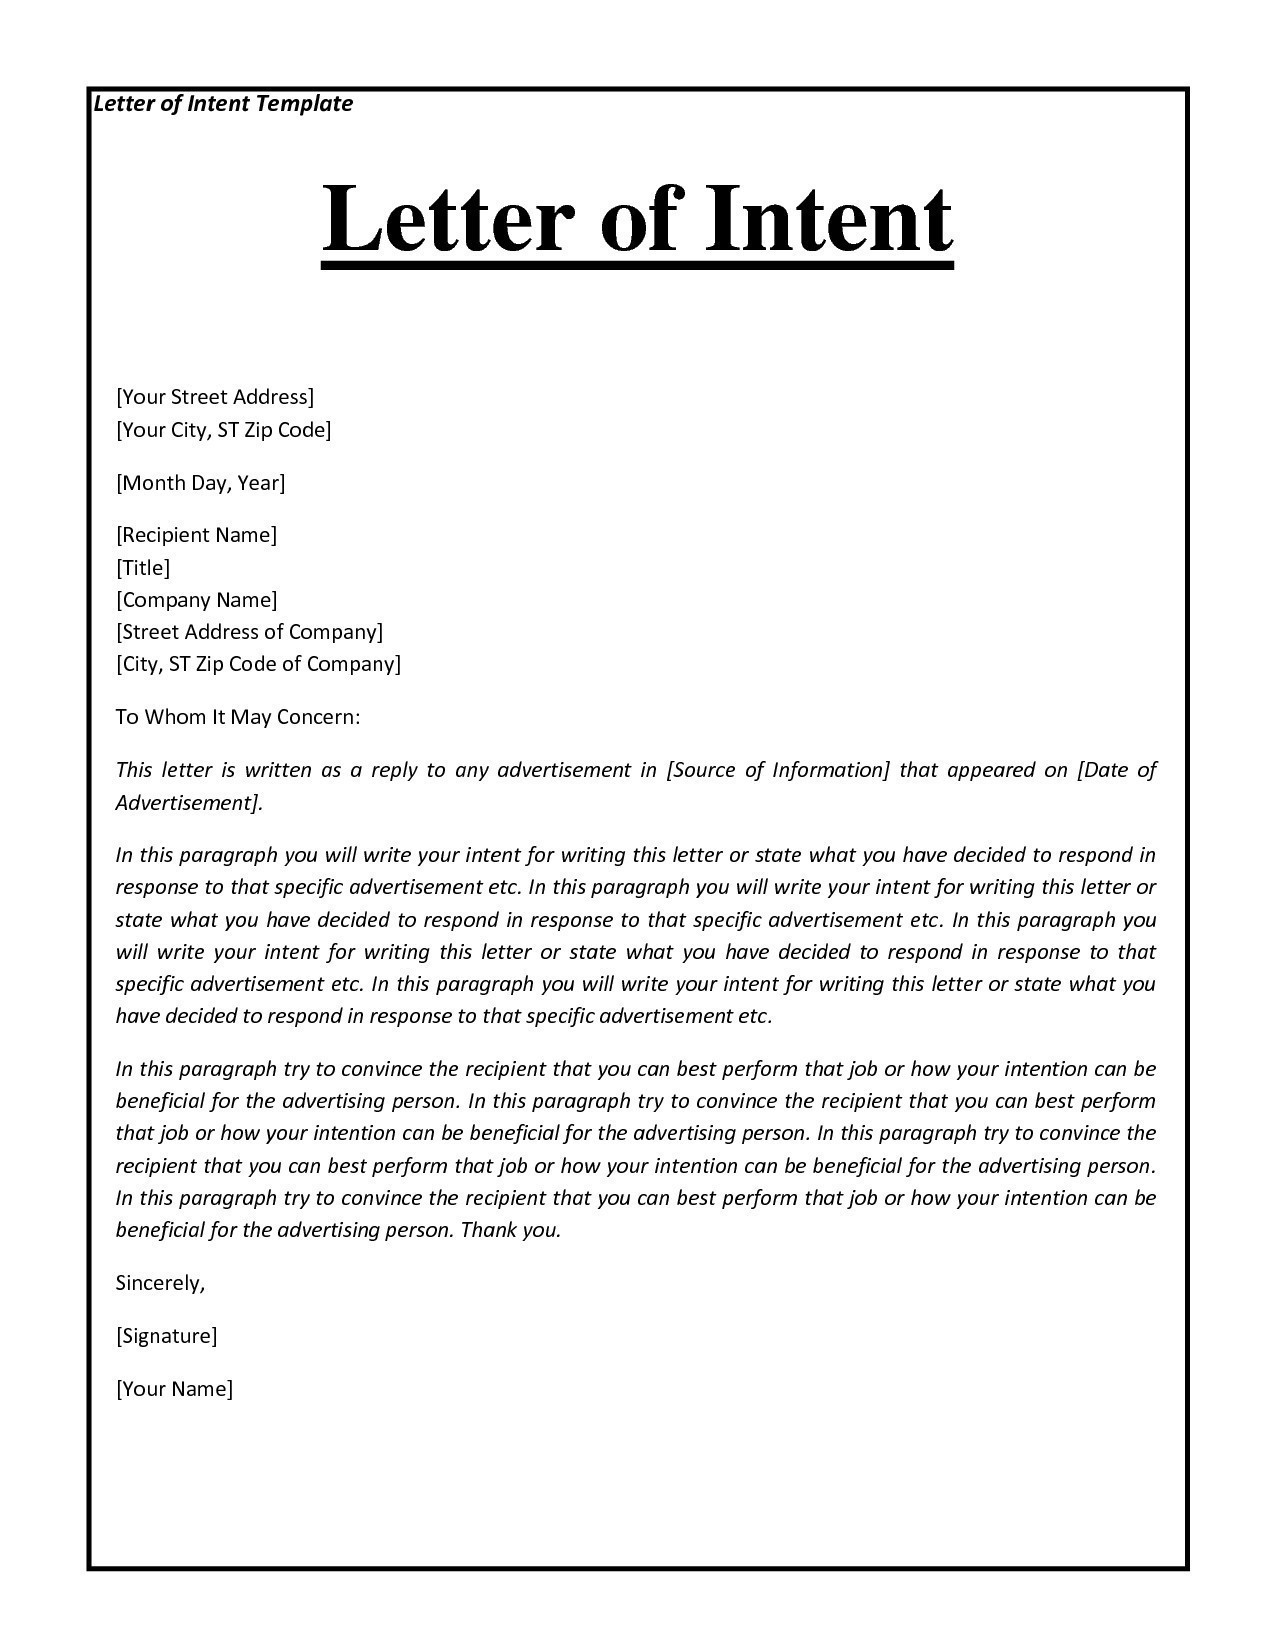 Letter Of Intent to Hire Template - Letter Intent Job Template Inspirationa Letter Intent Job Sample